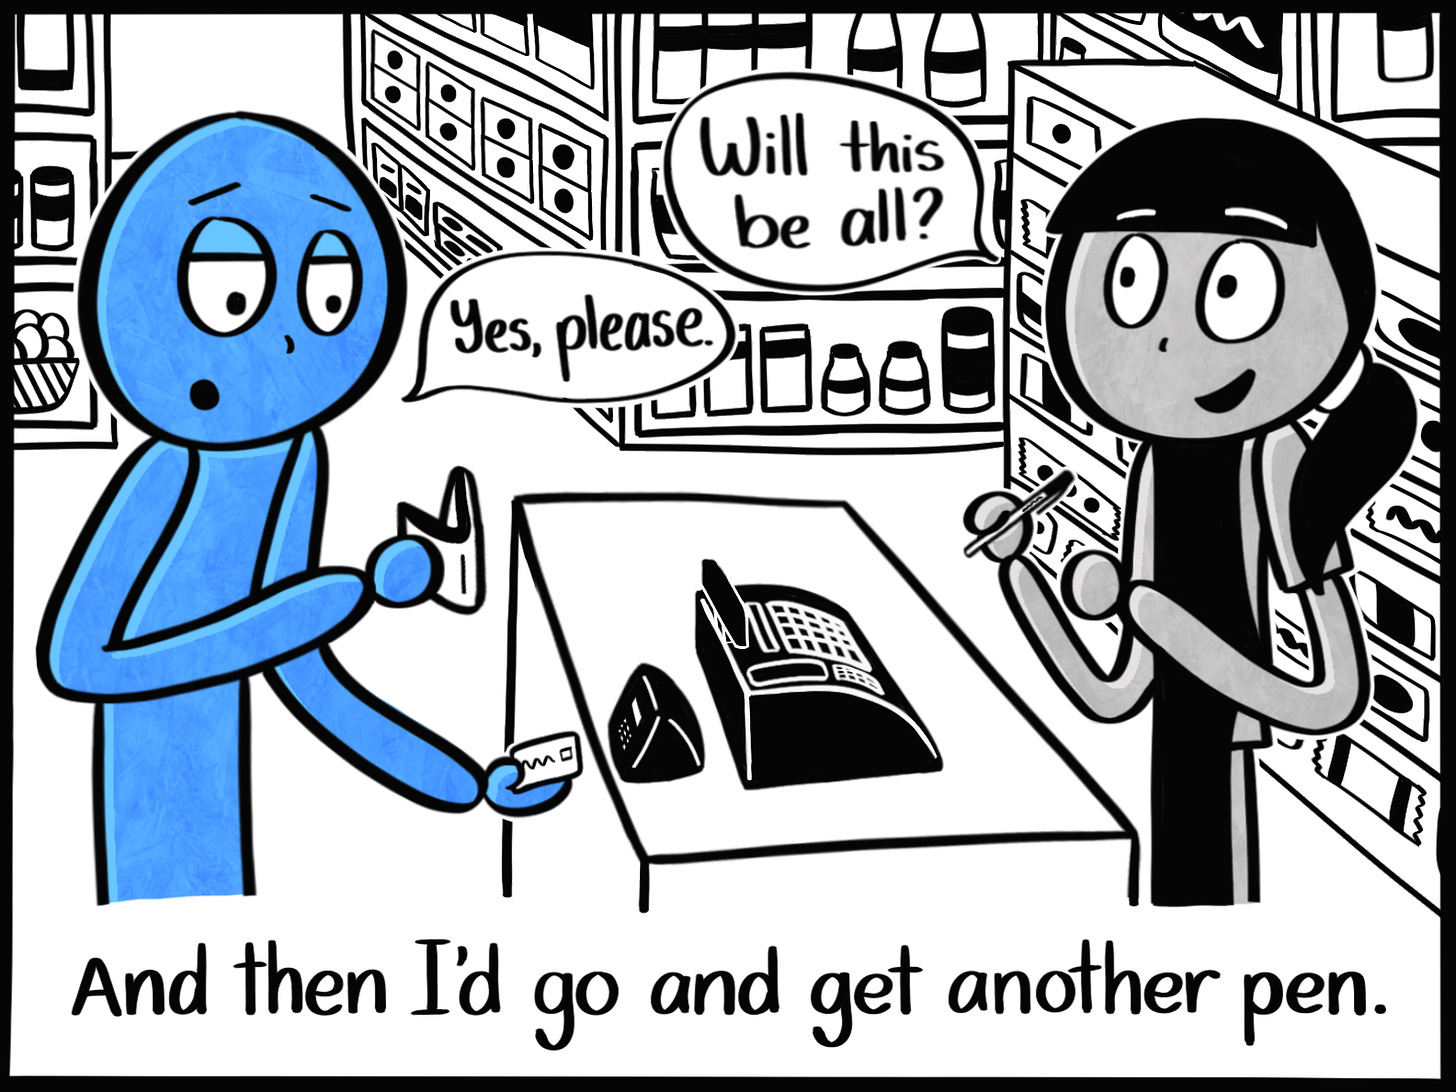 Caption: And then I'd go and get another pen. Image: The Blue Person sticks their credit card into a card reader at a grocery store. The clerk holds a single ballpoint pen and asks them, "Will this be all?" to which the Blue Person replies, "Yes please."